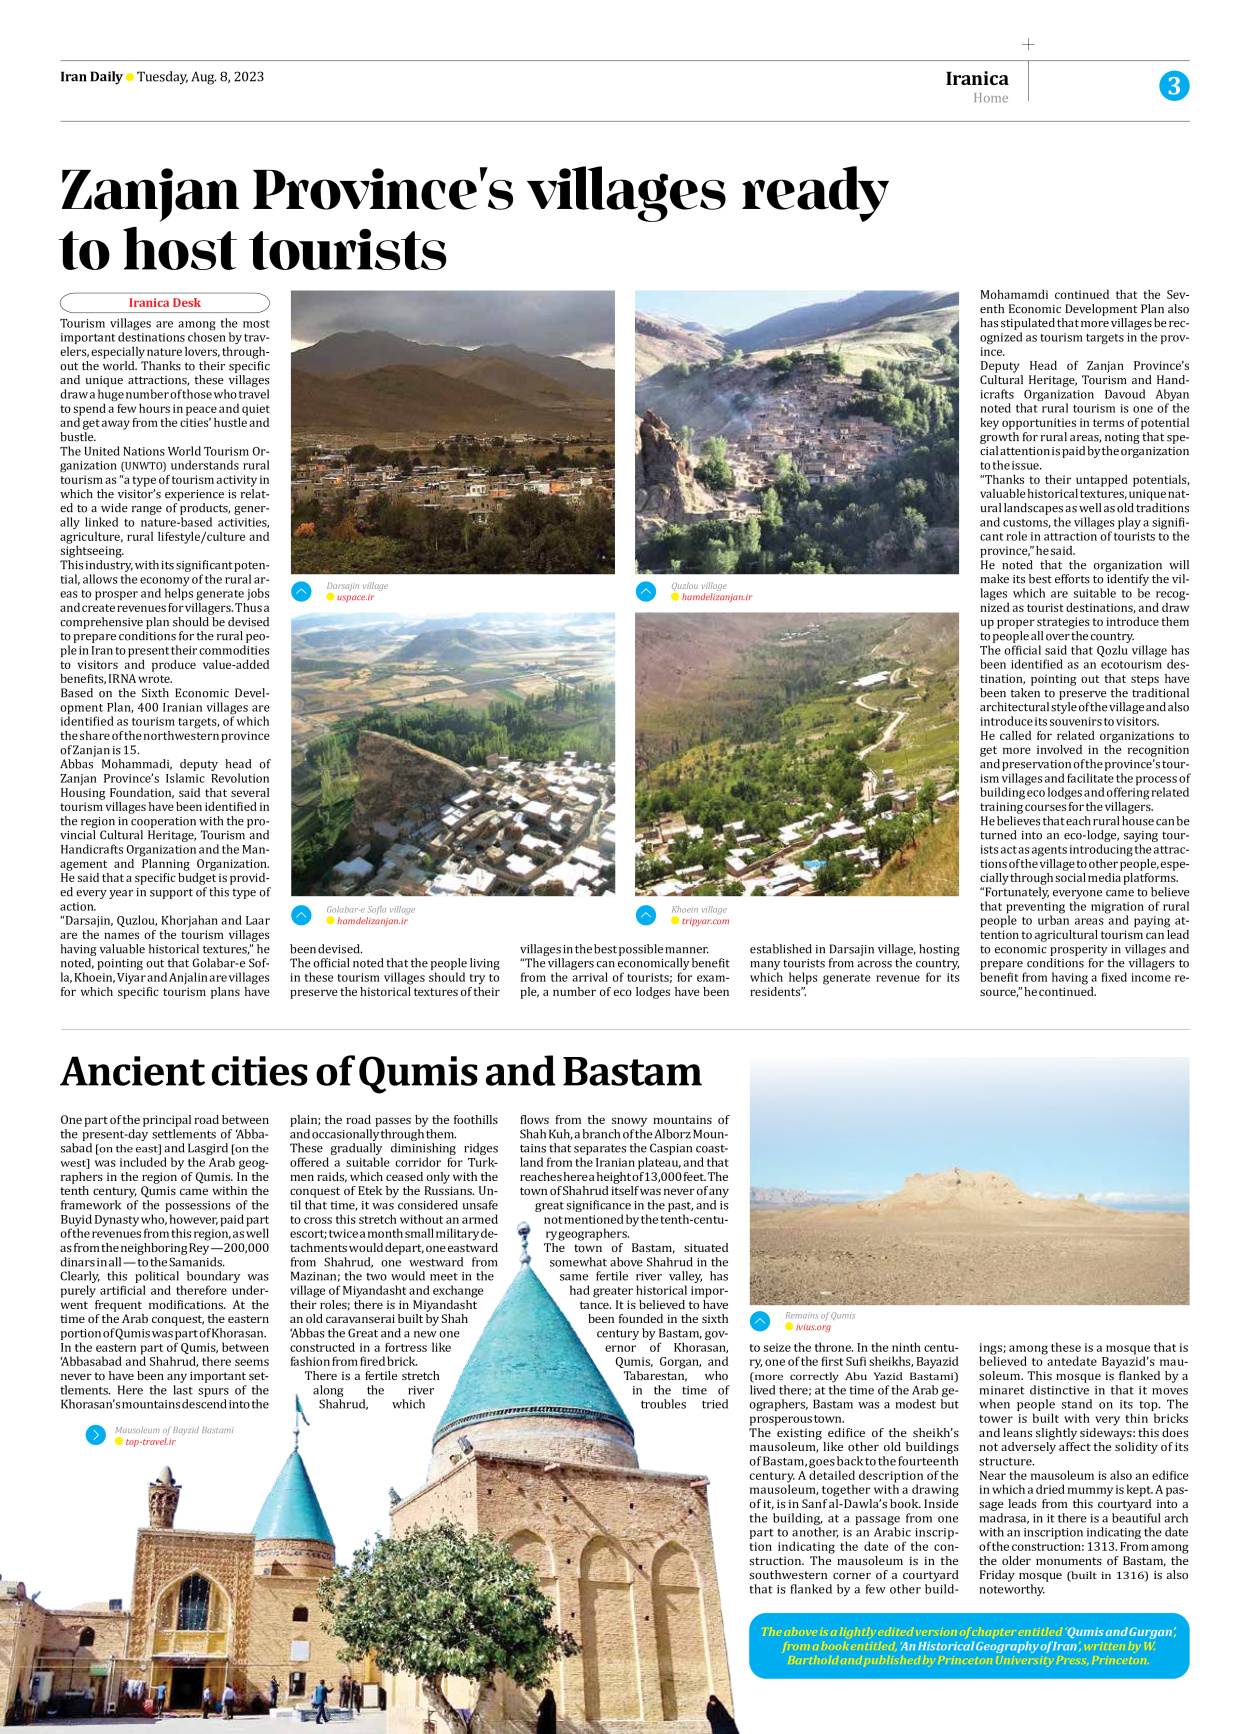 Iran Daily - Number Seven Thousand Three Hundred and Fifty Seven - 08 August 2023 - Page 3